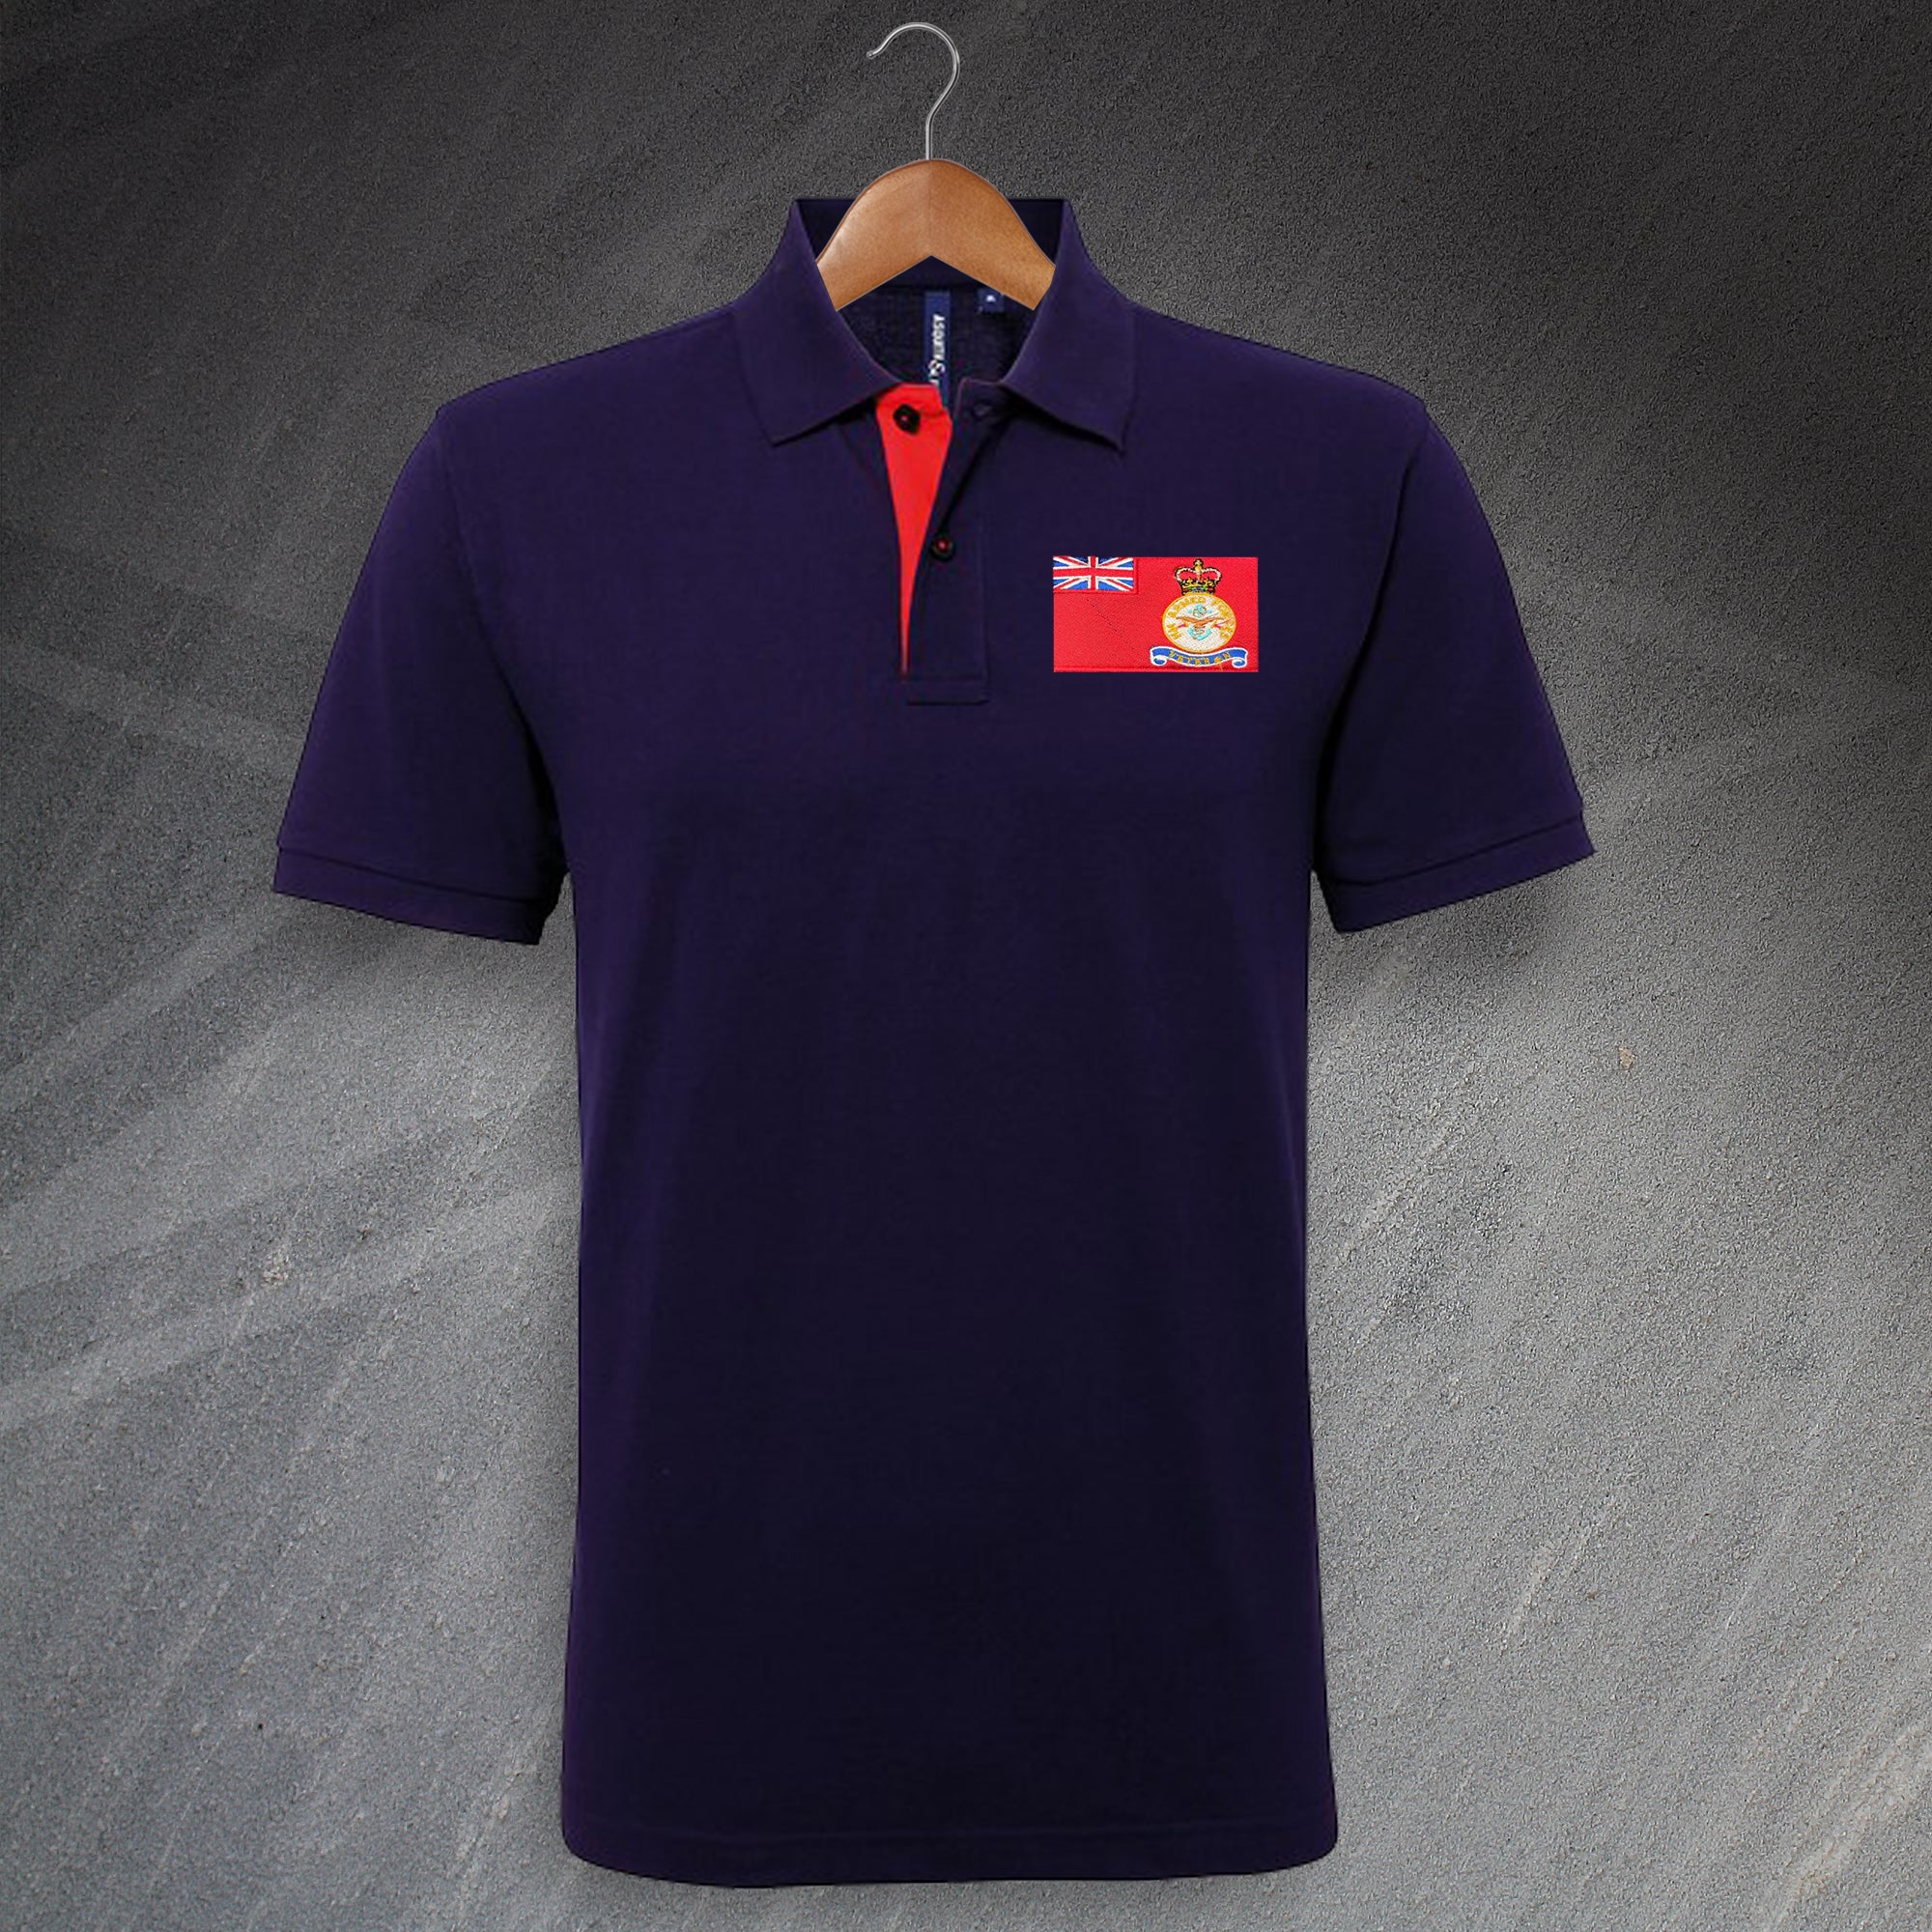 Merchant Navy Armed Forces Polo Shirt | Veteran Polo Shirts for Sale ...